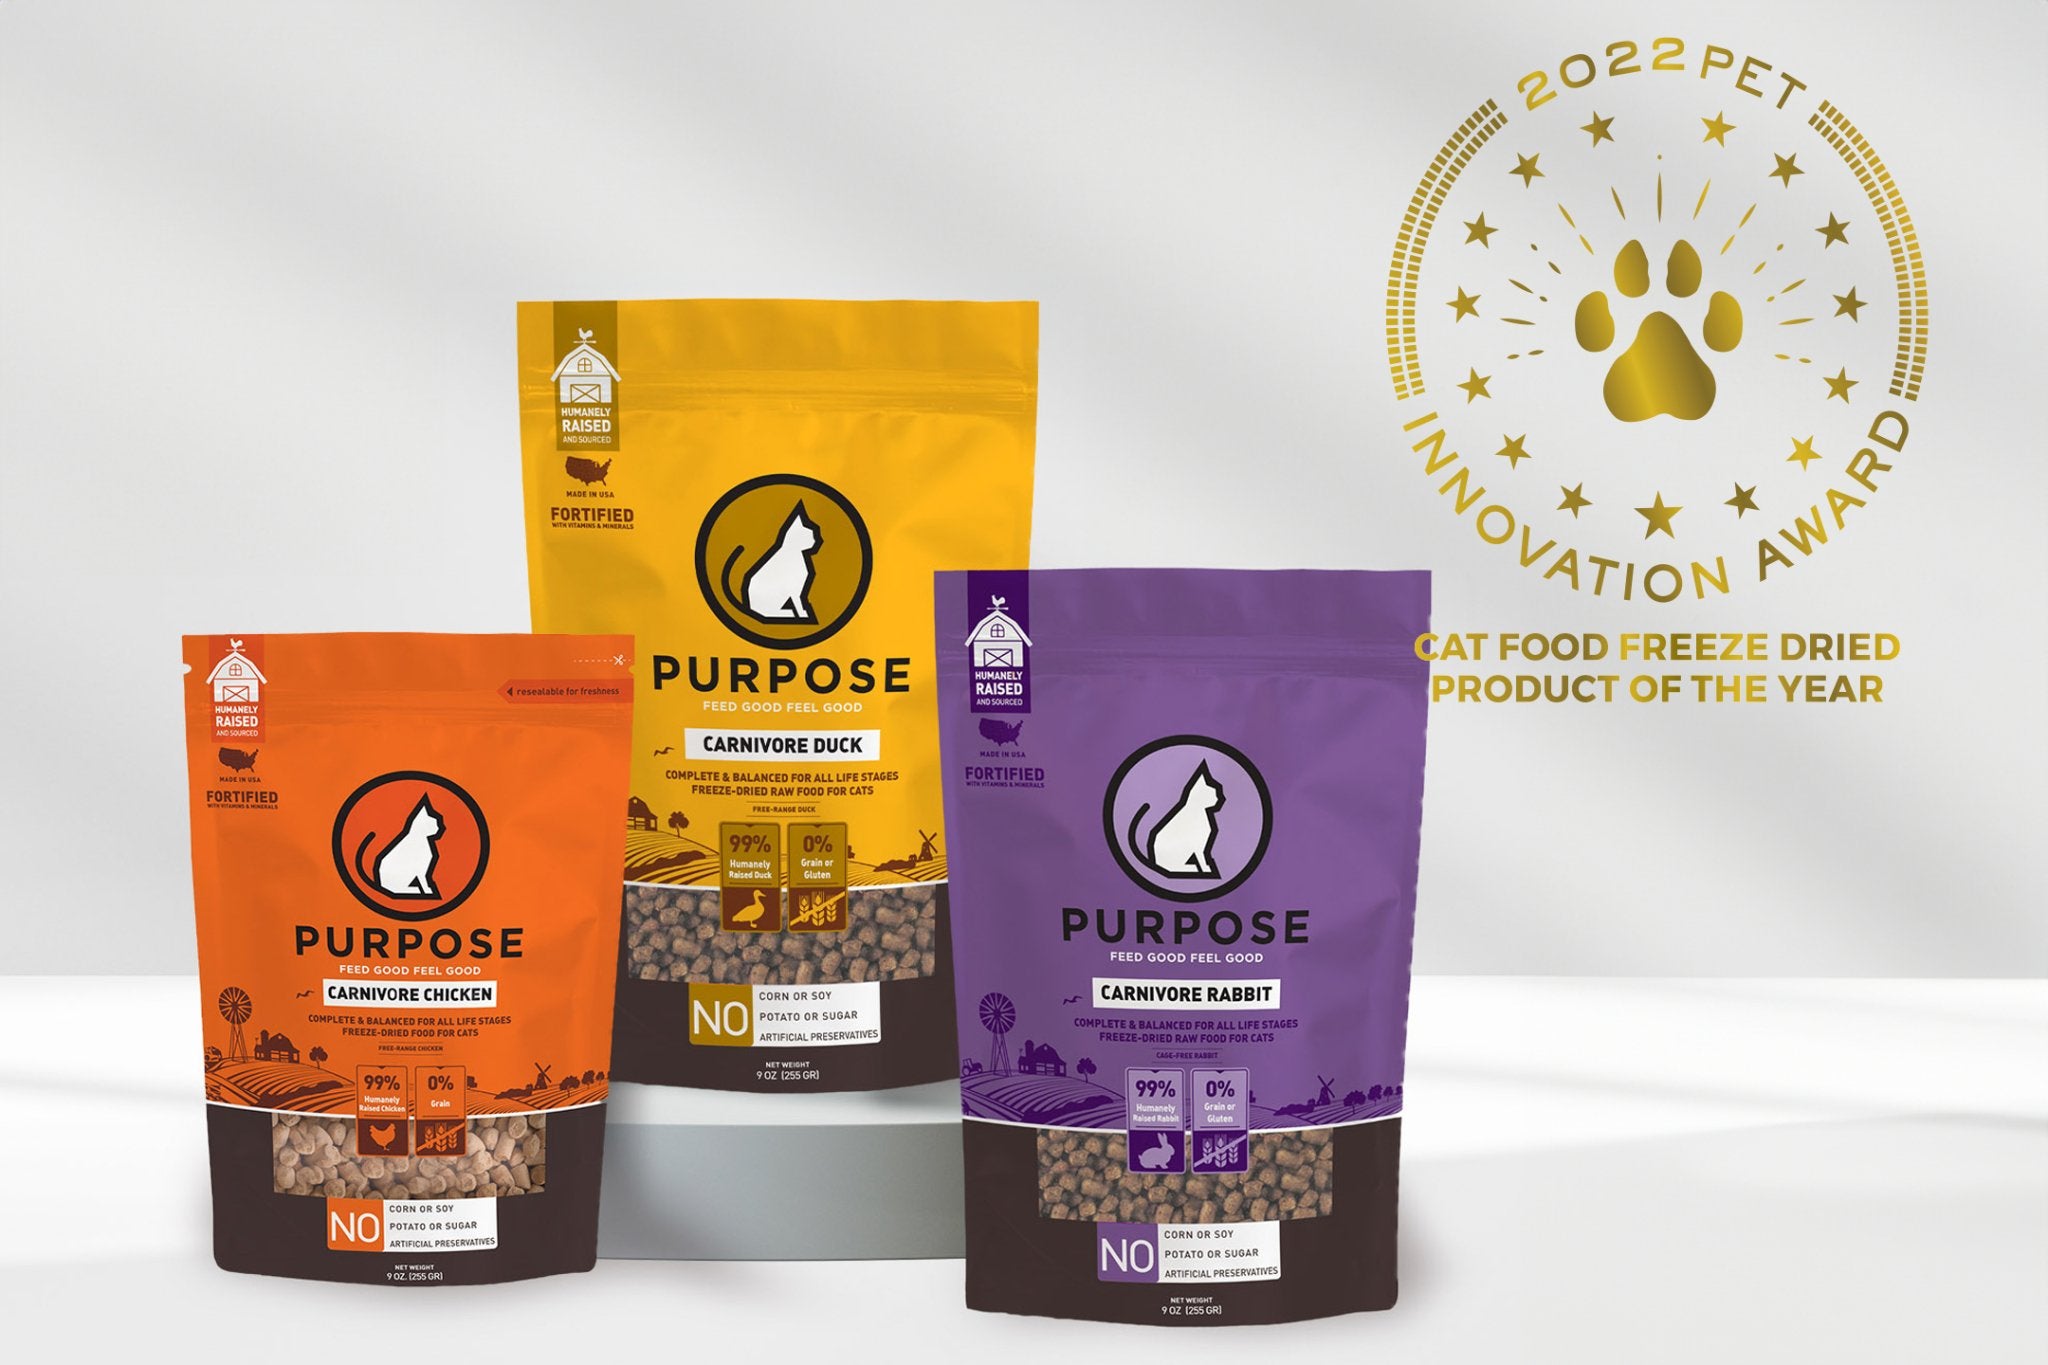 Cat Food Freeze Dried Product of the Year! - PURPOSE PET FOOD